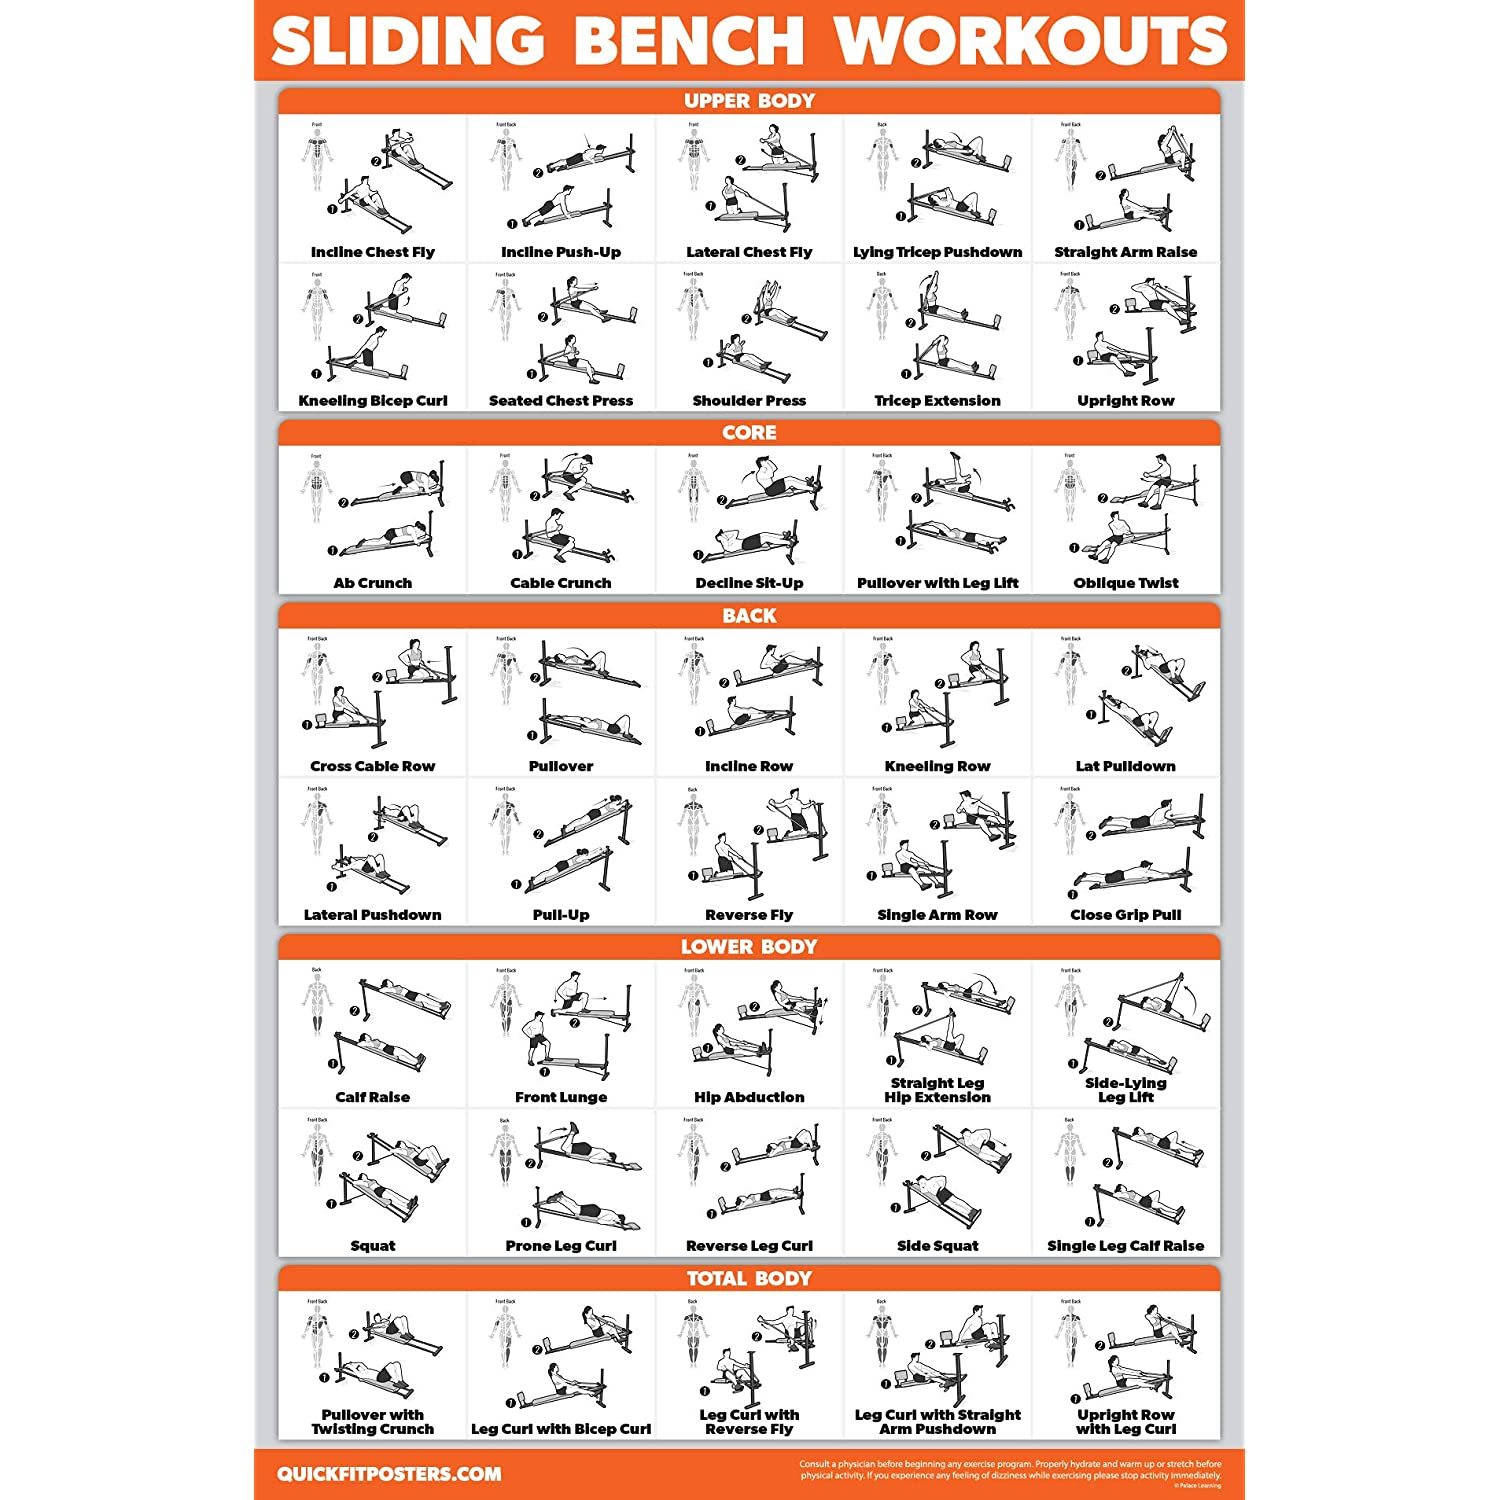 Sliding Bench Workout Poster - Compatible With Total Gym, Weider Ultim